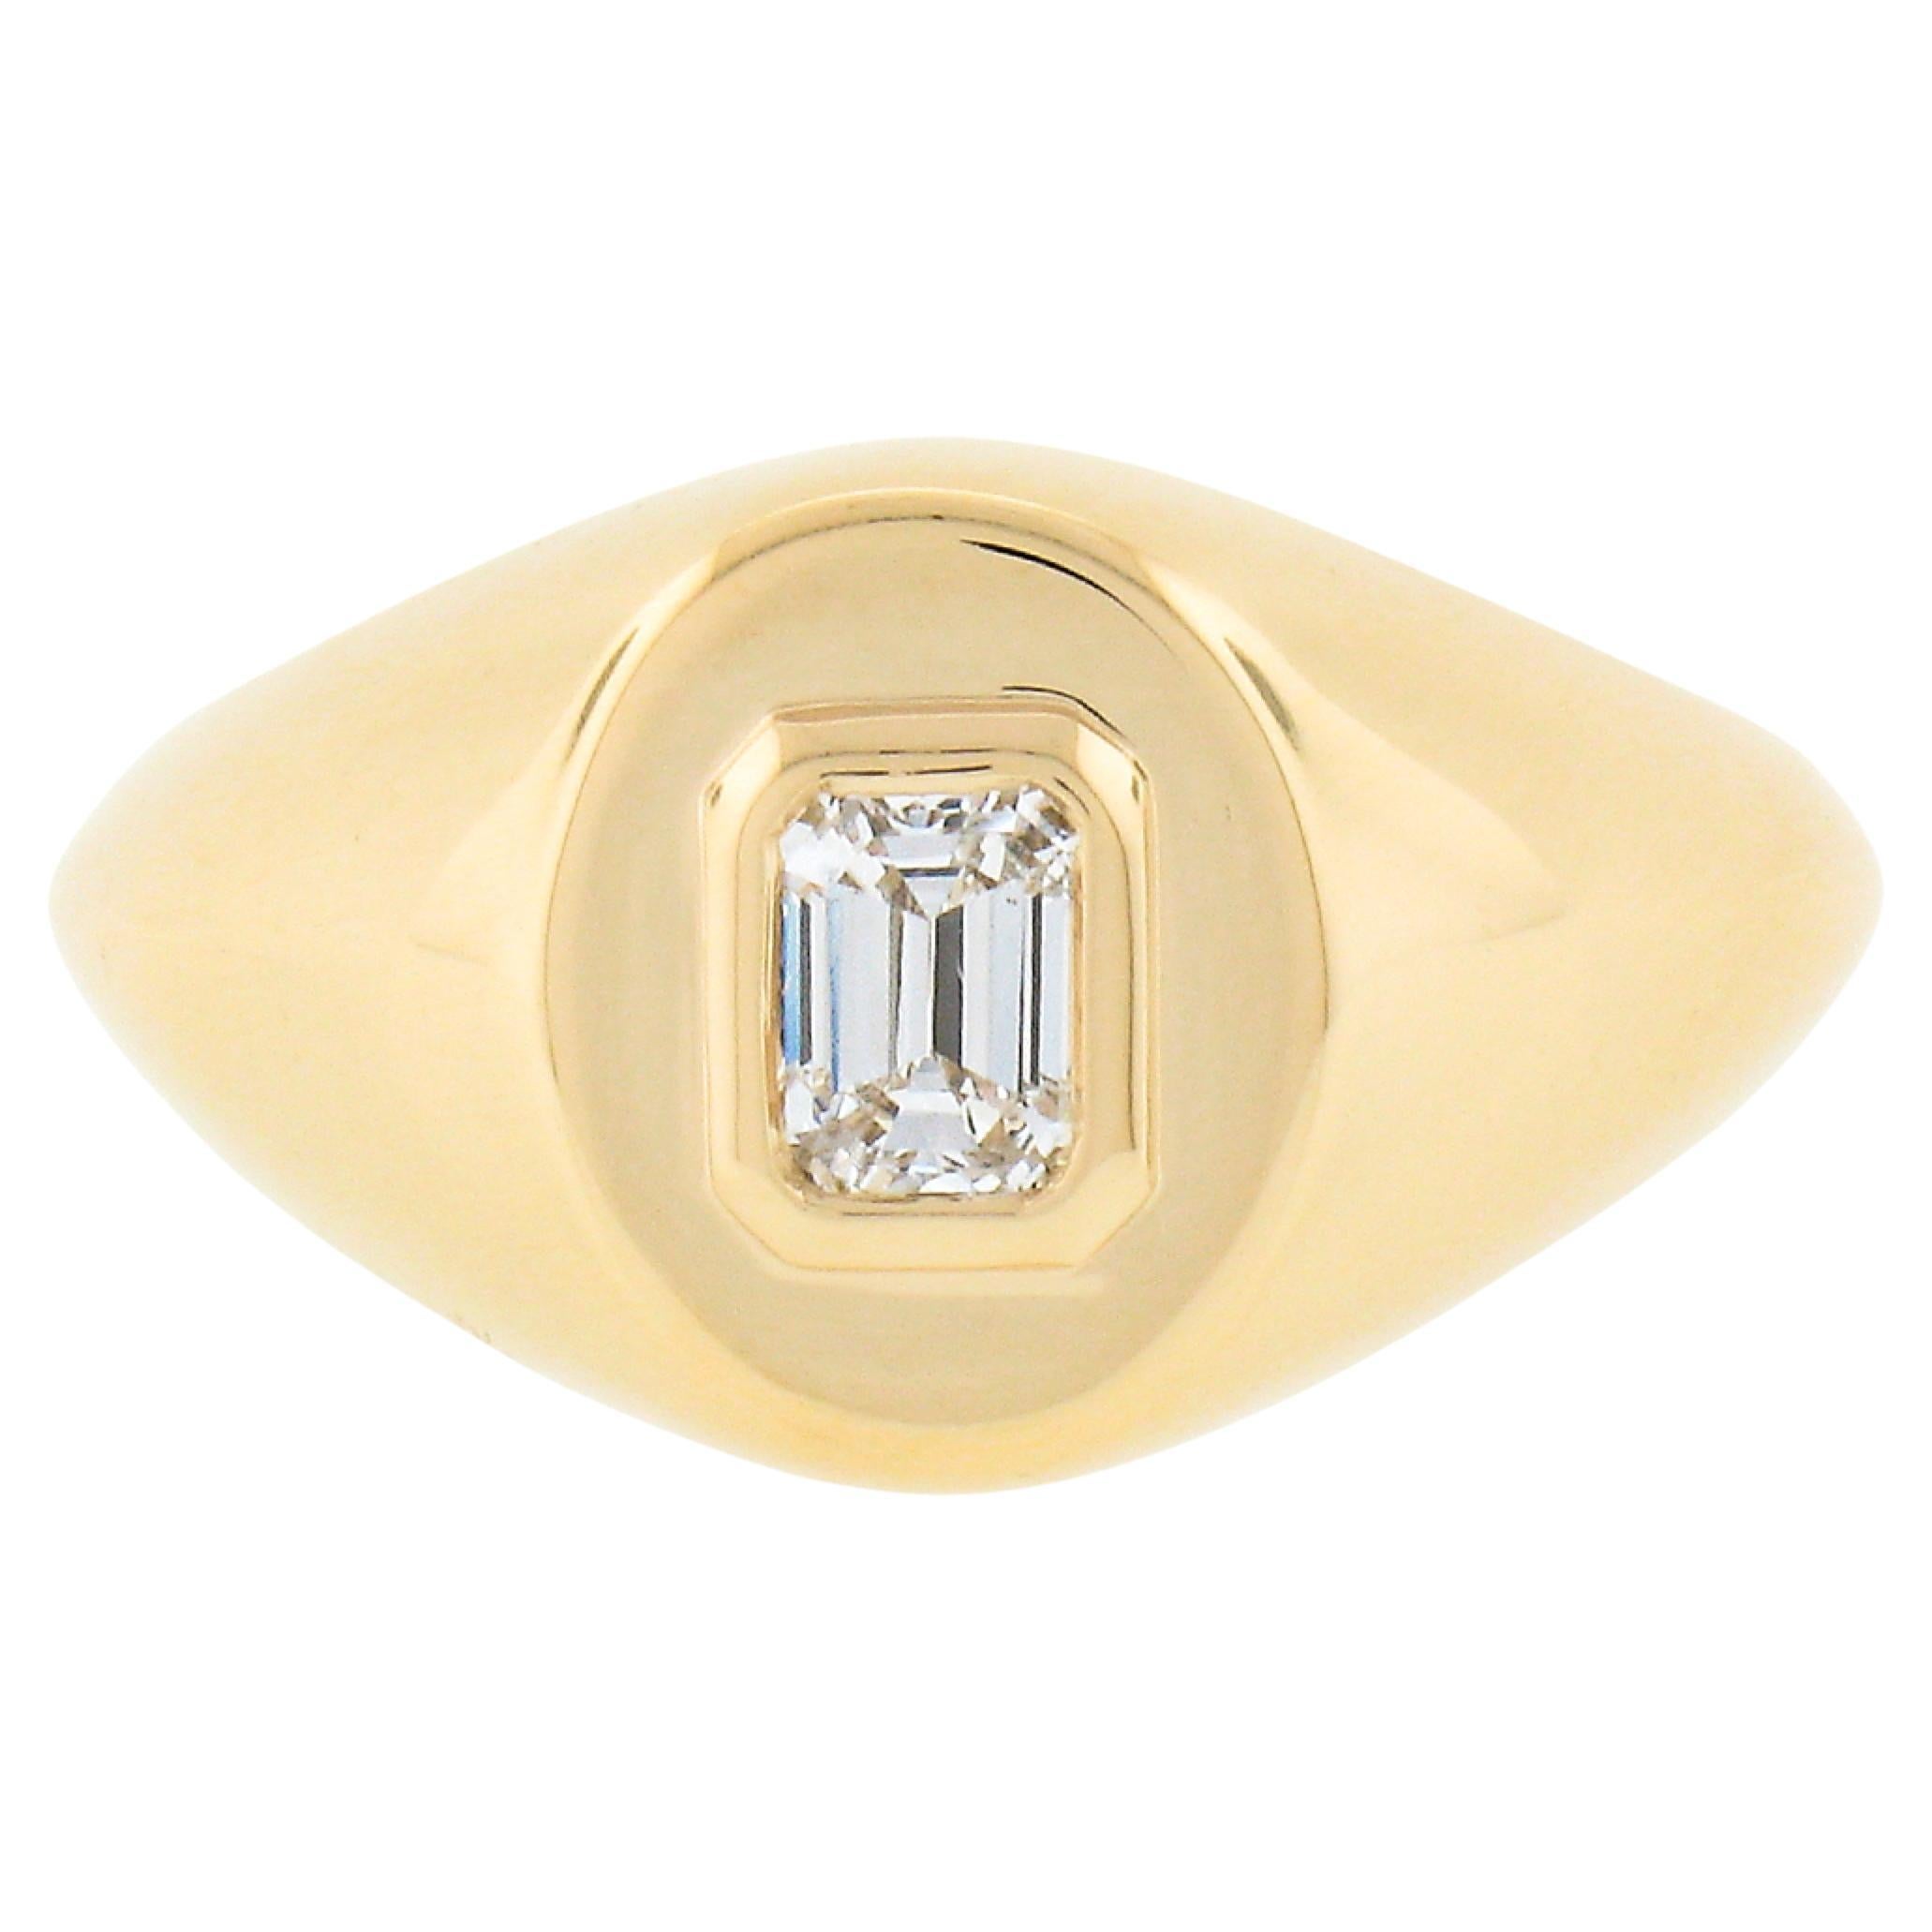 NEW Unisex 14k Gold 0.40ctw Emerald Cut Diamond Bezel Solitaire Signet Band Ring For Sale